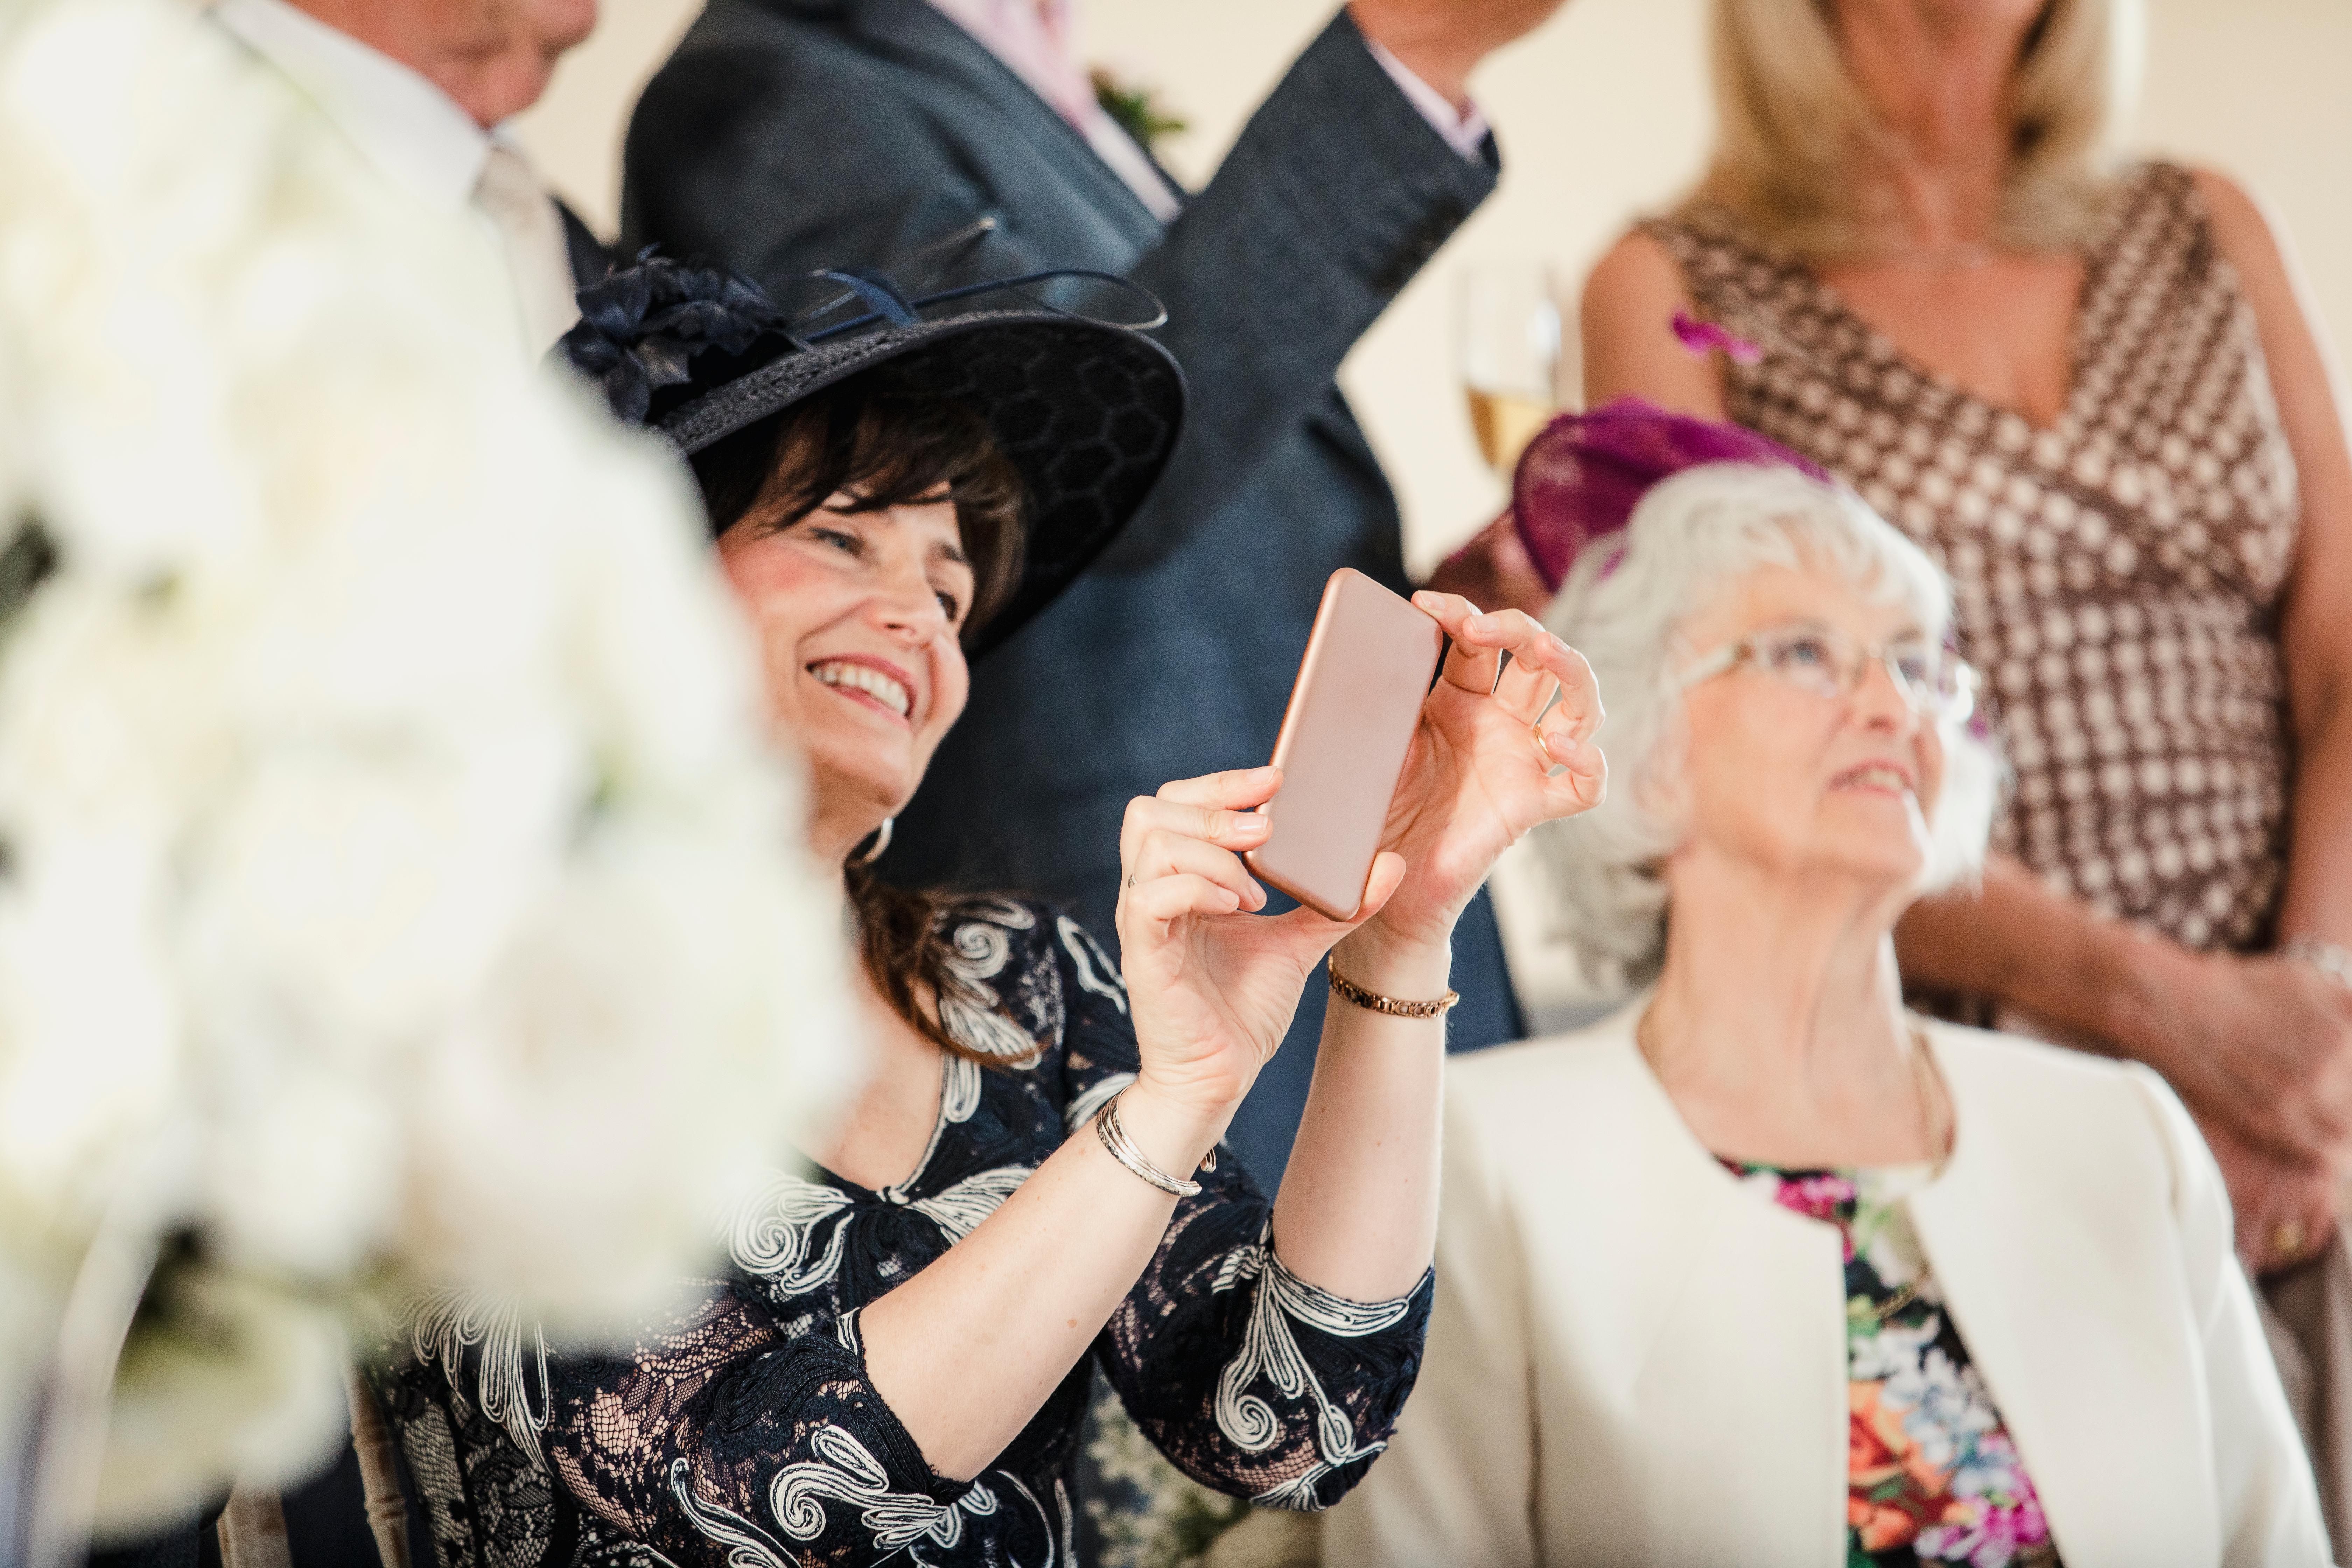 A middle-aged woman is seen holding a phone while sitting next to an older lady at a wedding ceremony | Source: Shutterstock